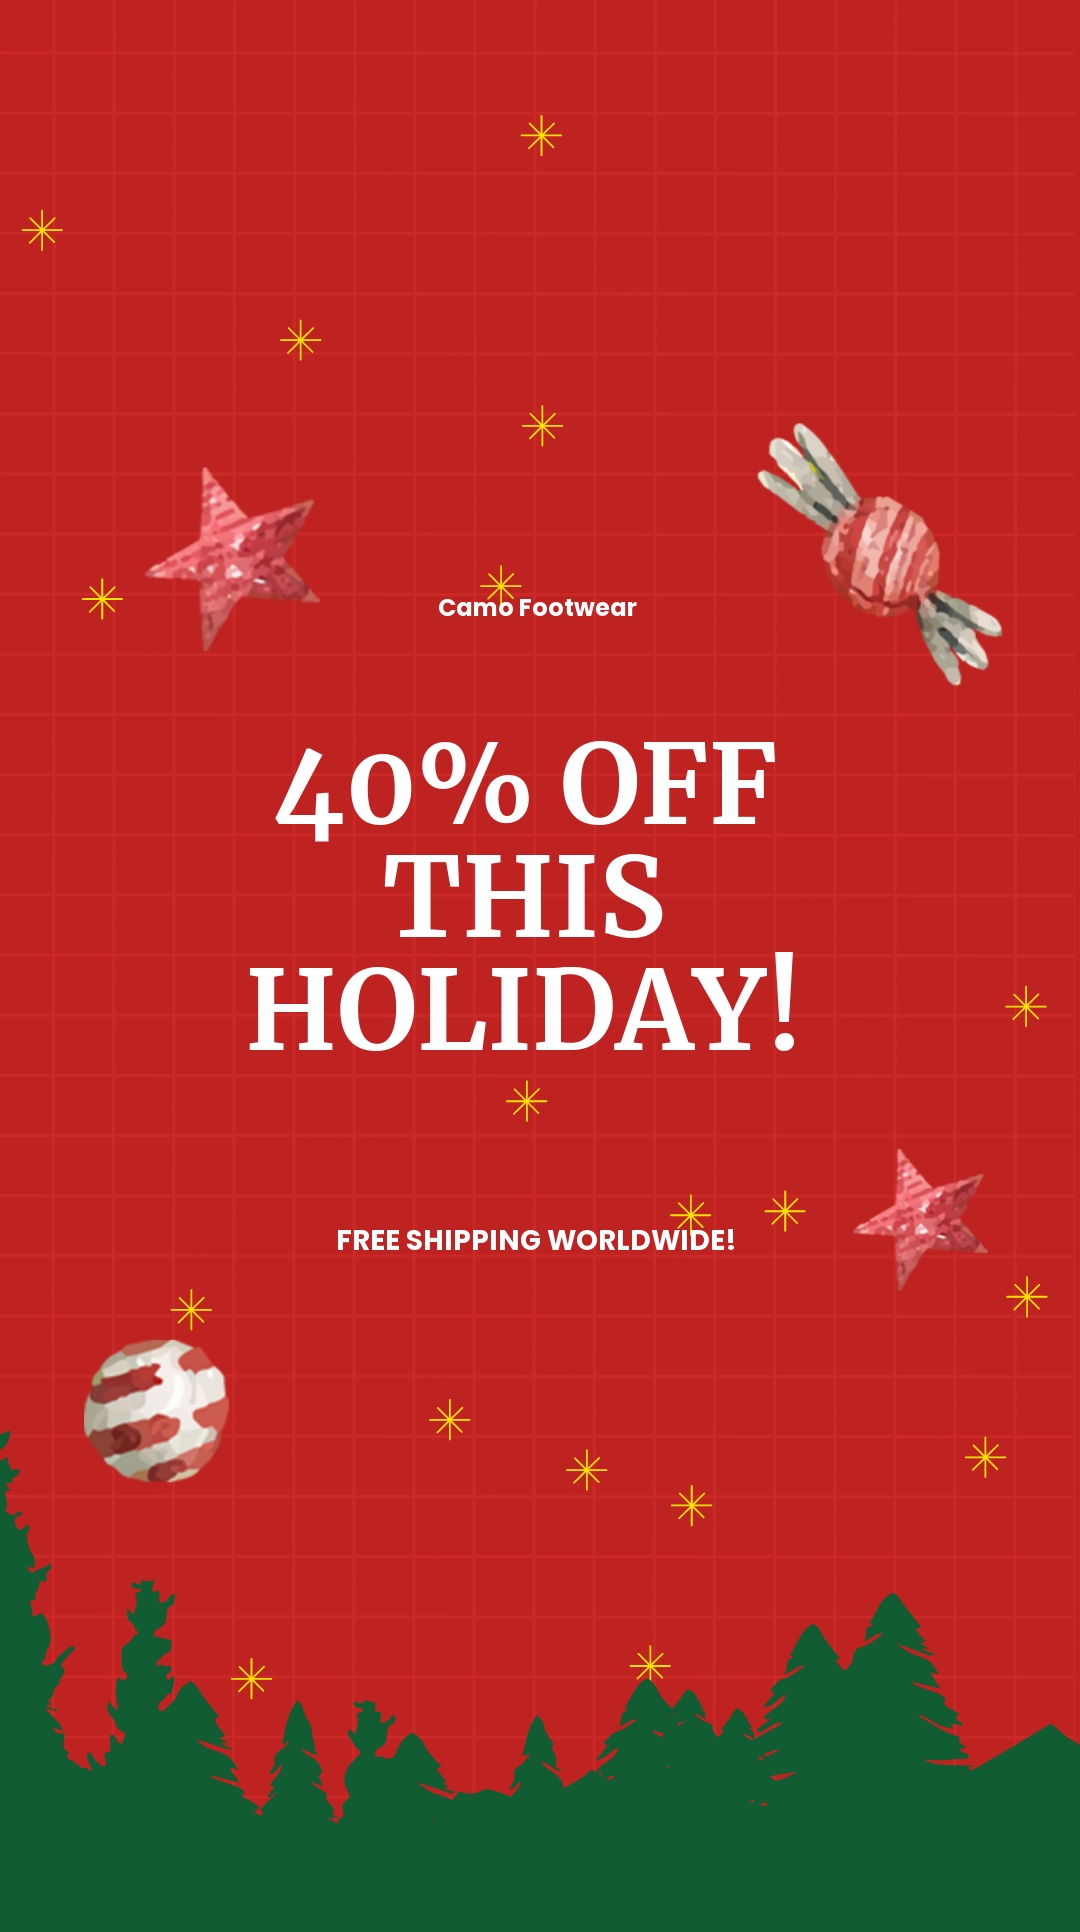 Holiday Off Sale Instagram Post Template PSD Template net